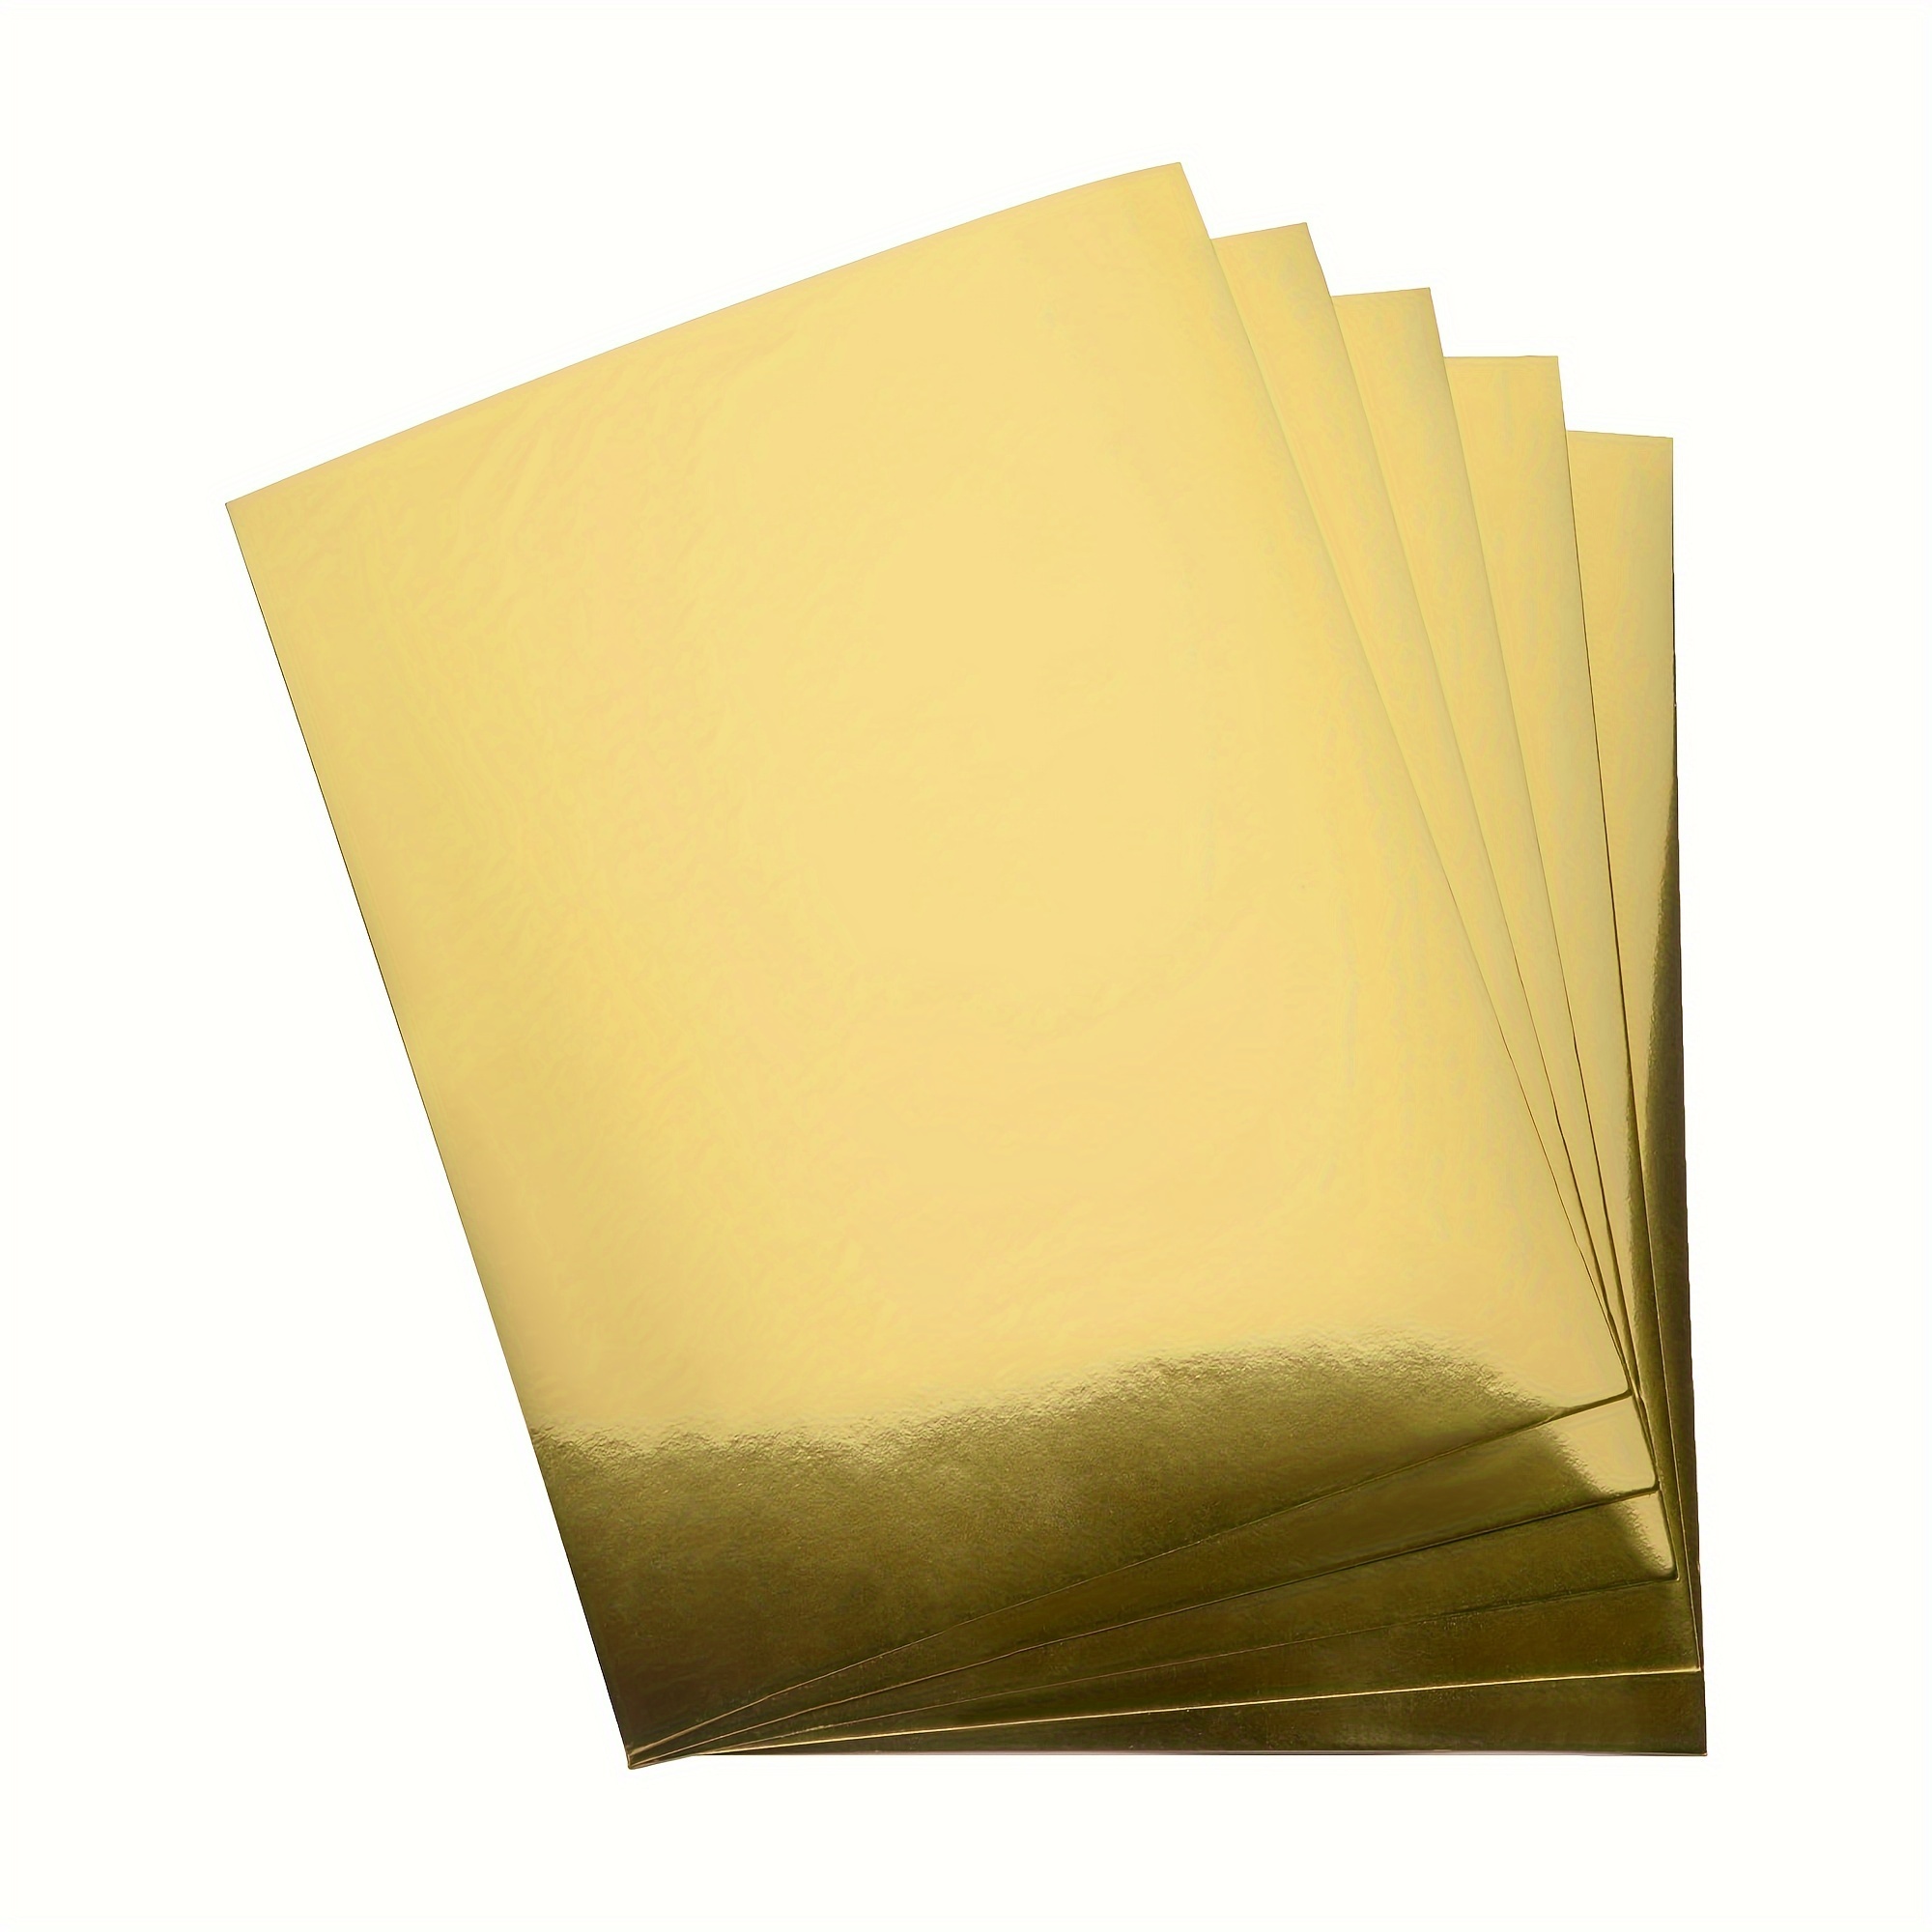 

10-pack A4 Metallic Card Stock Sheets - Gold And Silver Paper For Crafting, Invitations, Office Supplies - Single Side, Shimmering Finish